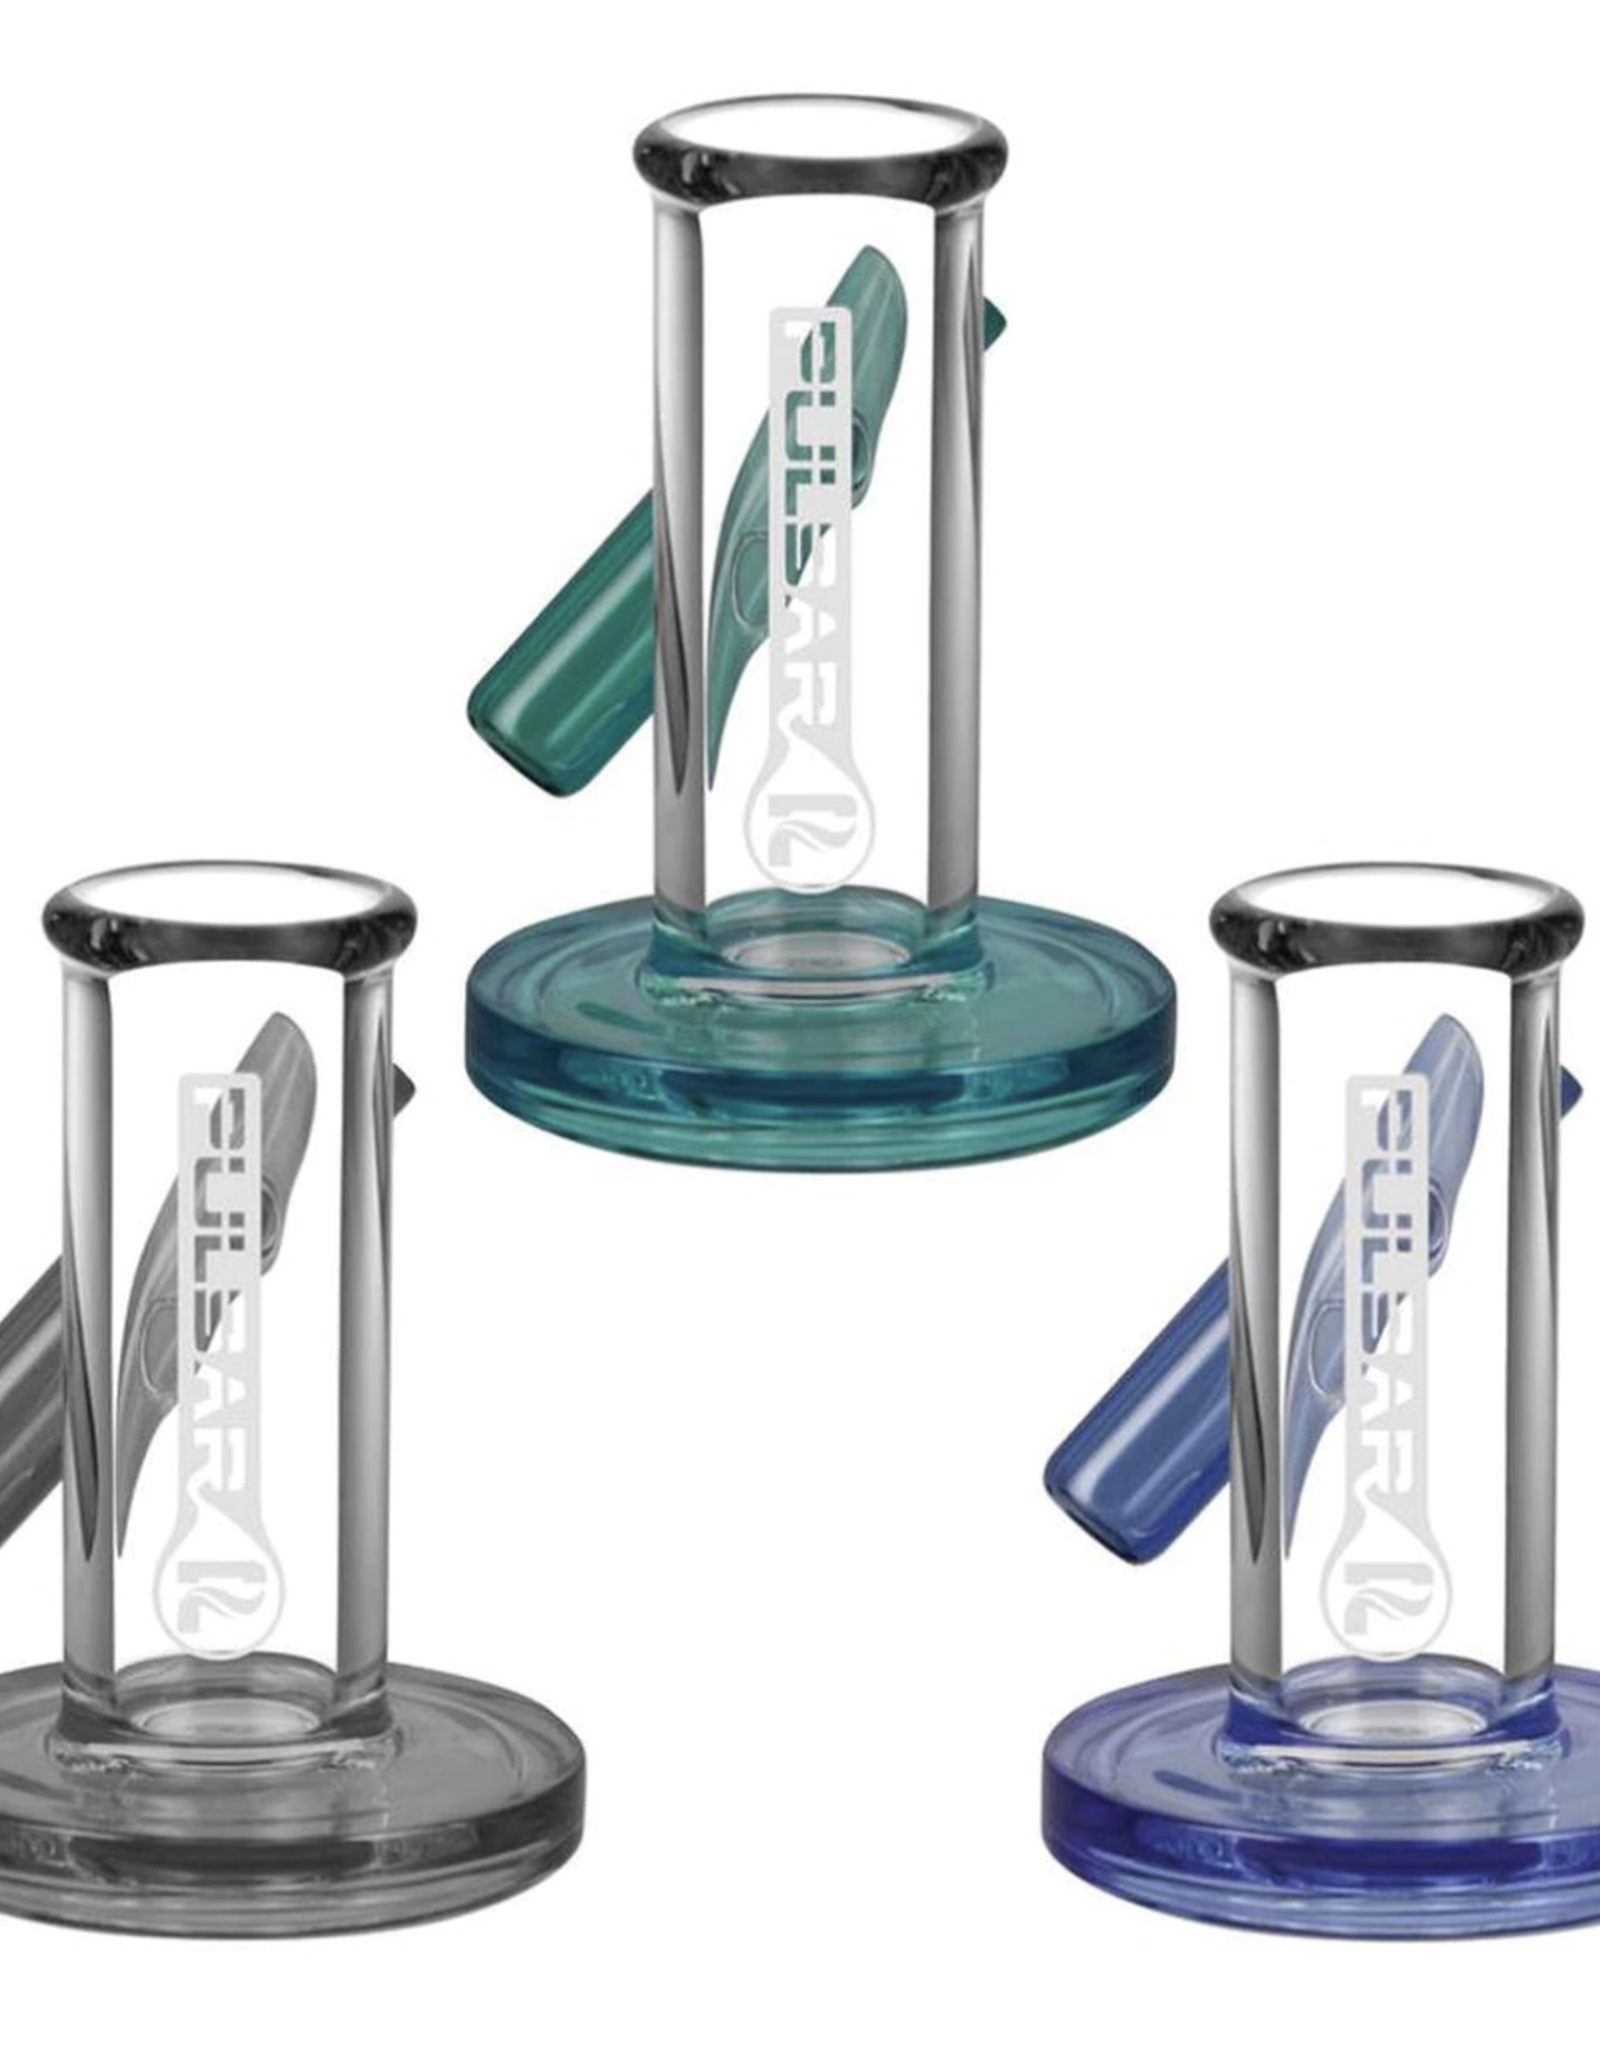 Pulsar 3" Carb Cap and Dab Tool Stand by Pulsar